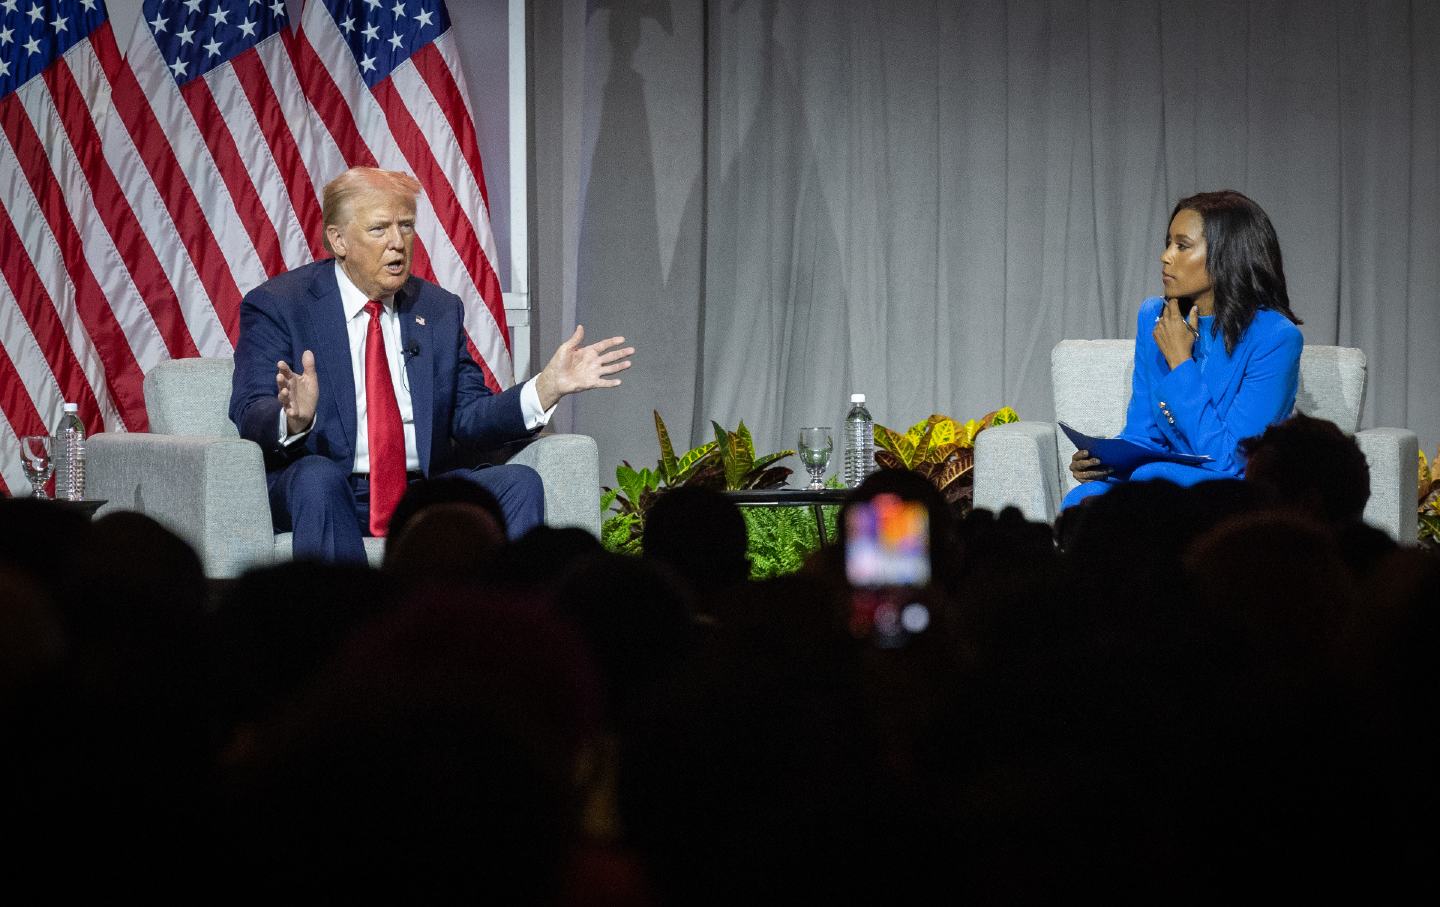 Donald Trump sitting on stage at a panel in front of American flag